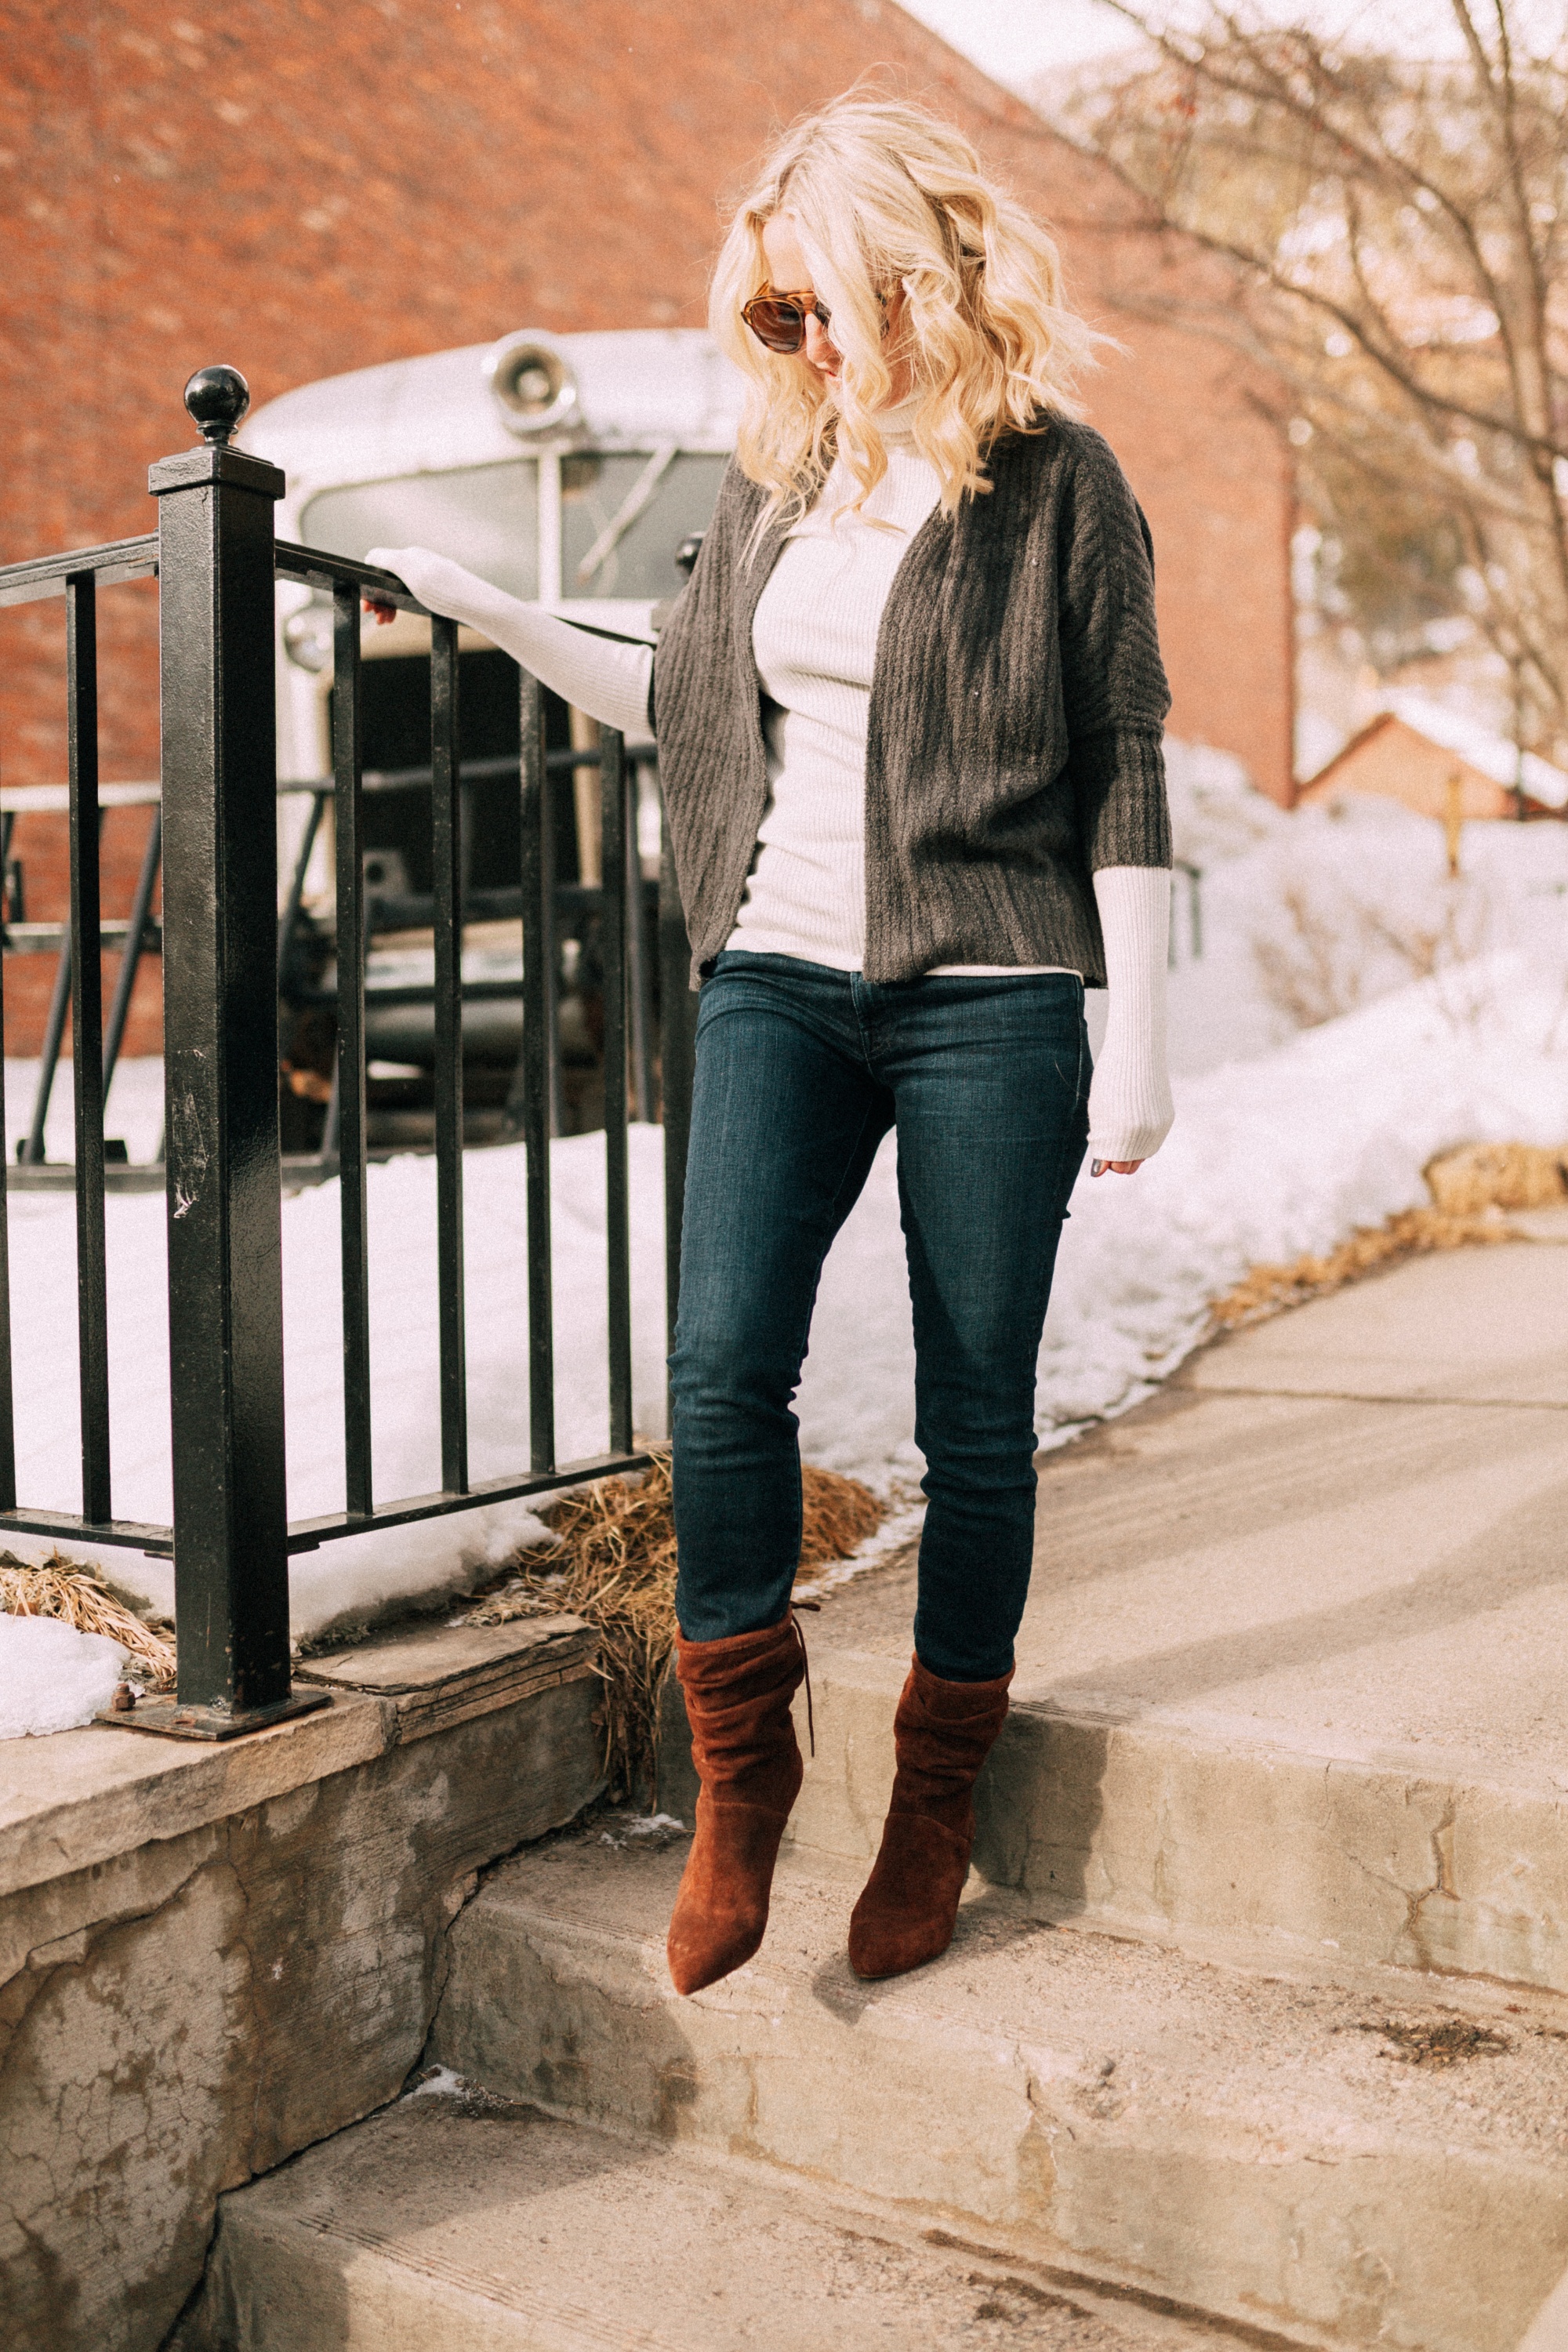 Styling a Cardigan Sweater 2 Ways, one look for date night and one for everyday casual activities featuring a Barefoot Dreams shrug cardigan on fashion blogger over 40, Erin Busbee in partnership with QVC